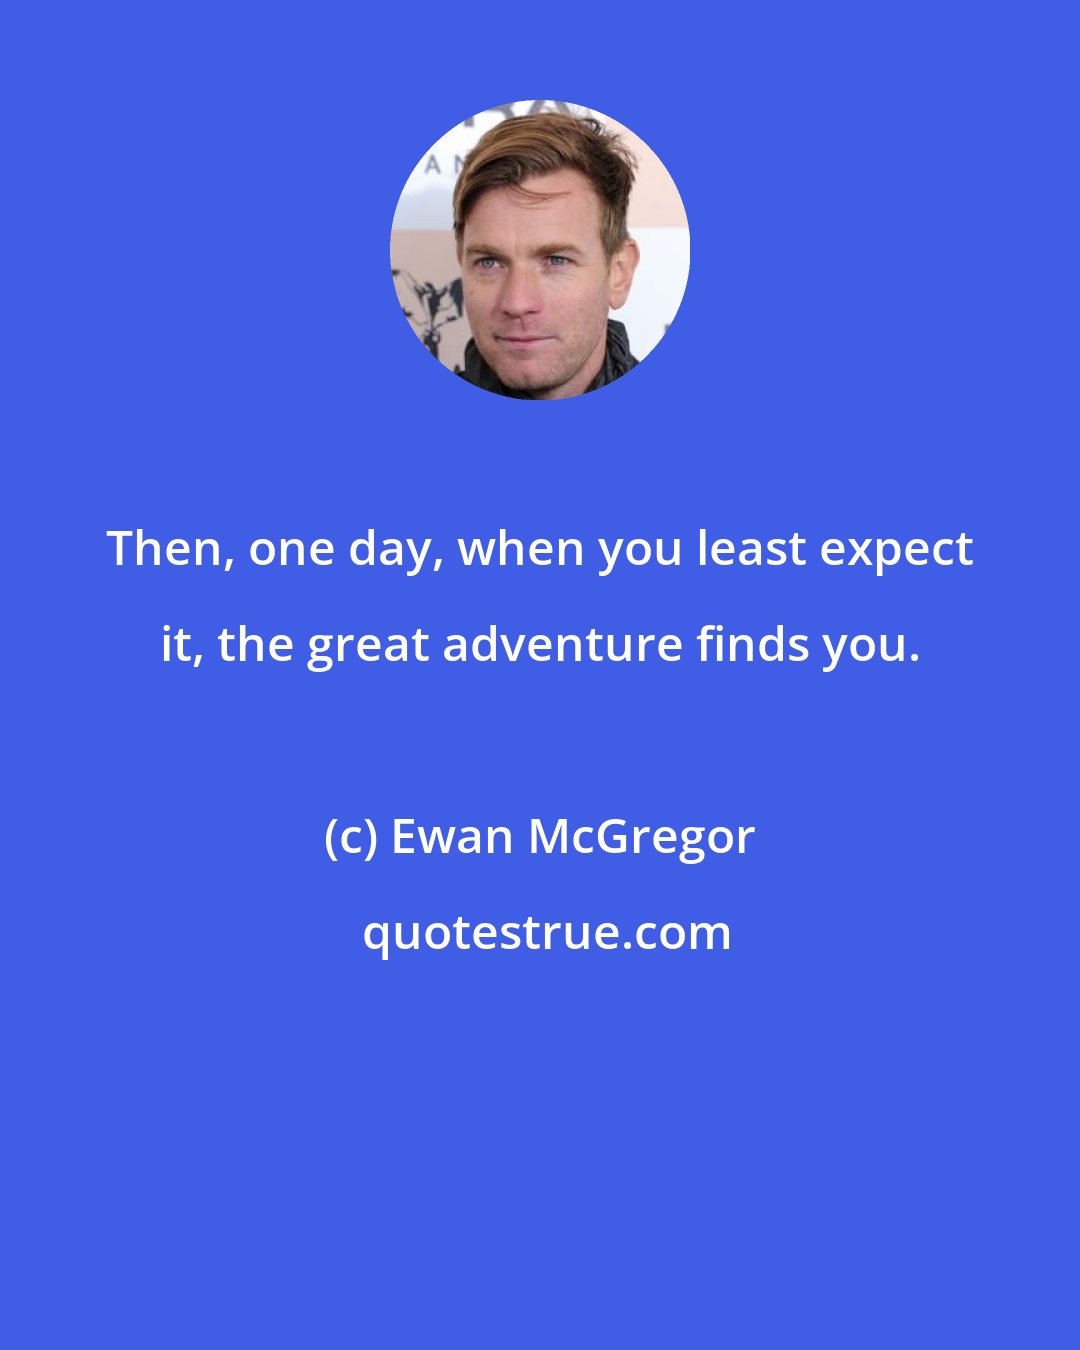 Ewan McGregor: Then, one day, when you least expect it, the great adventure finds you.